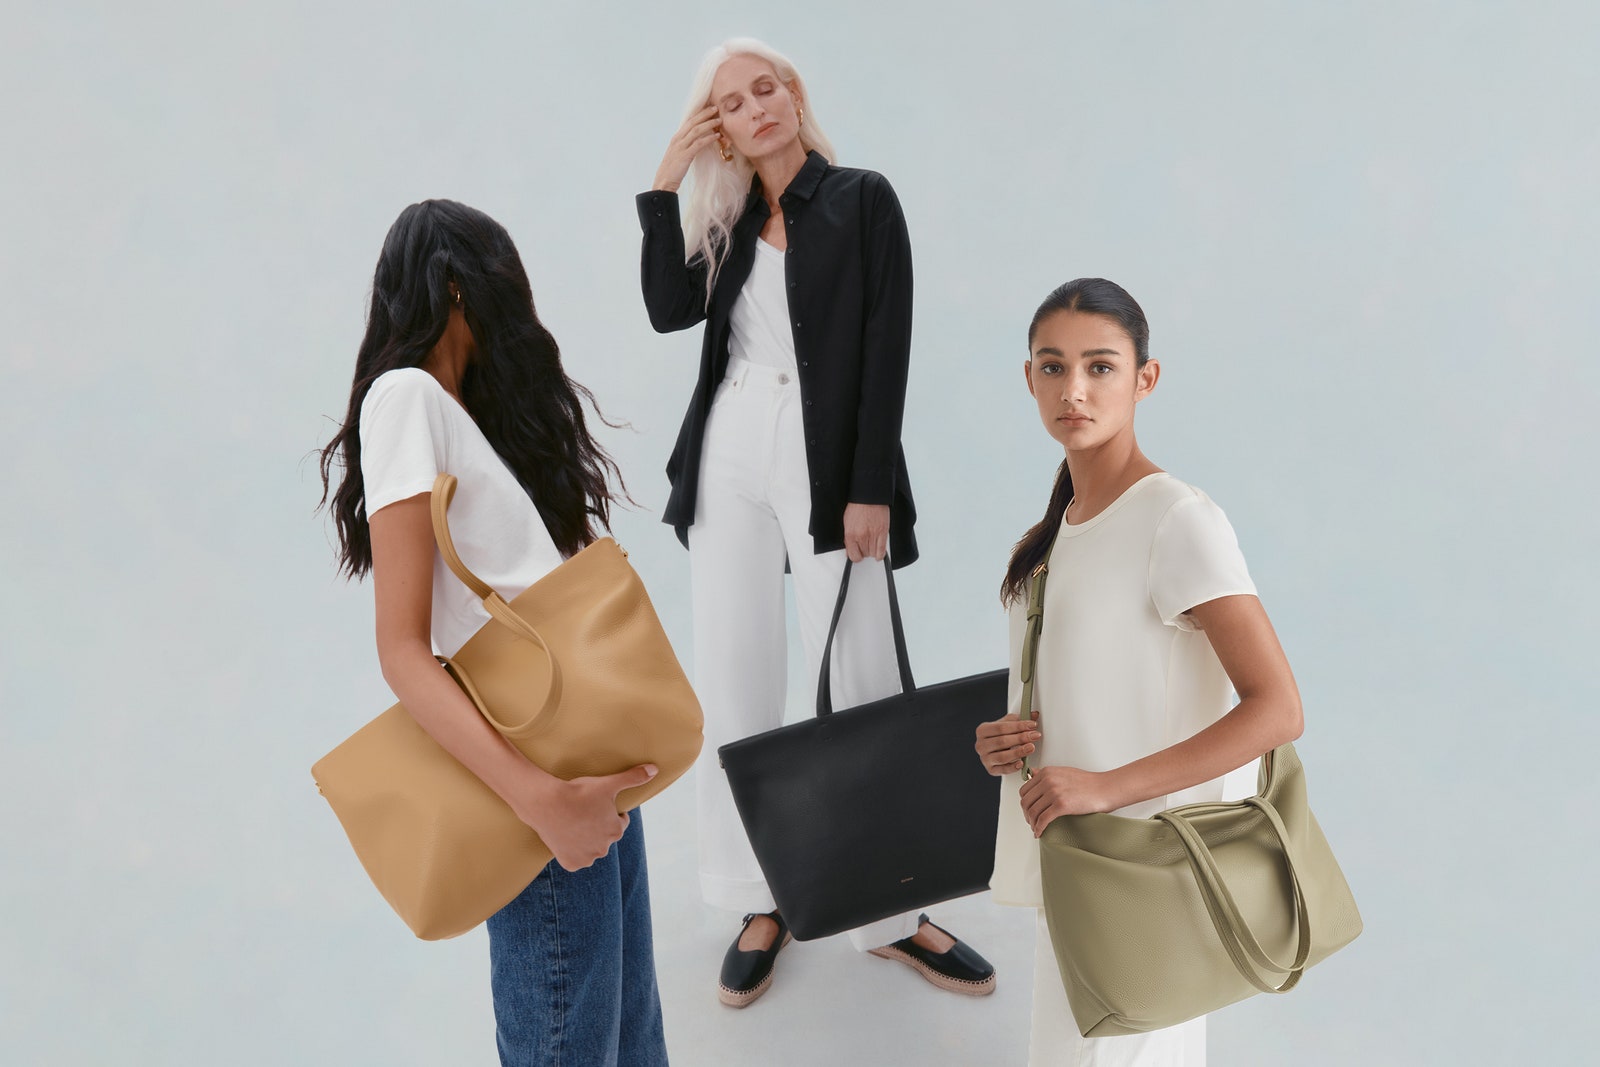 I Tested Cuyana’s Popular Carry-All Tote&-Here’s How It Held Up on Two Back-to-Back Trips